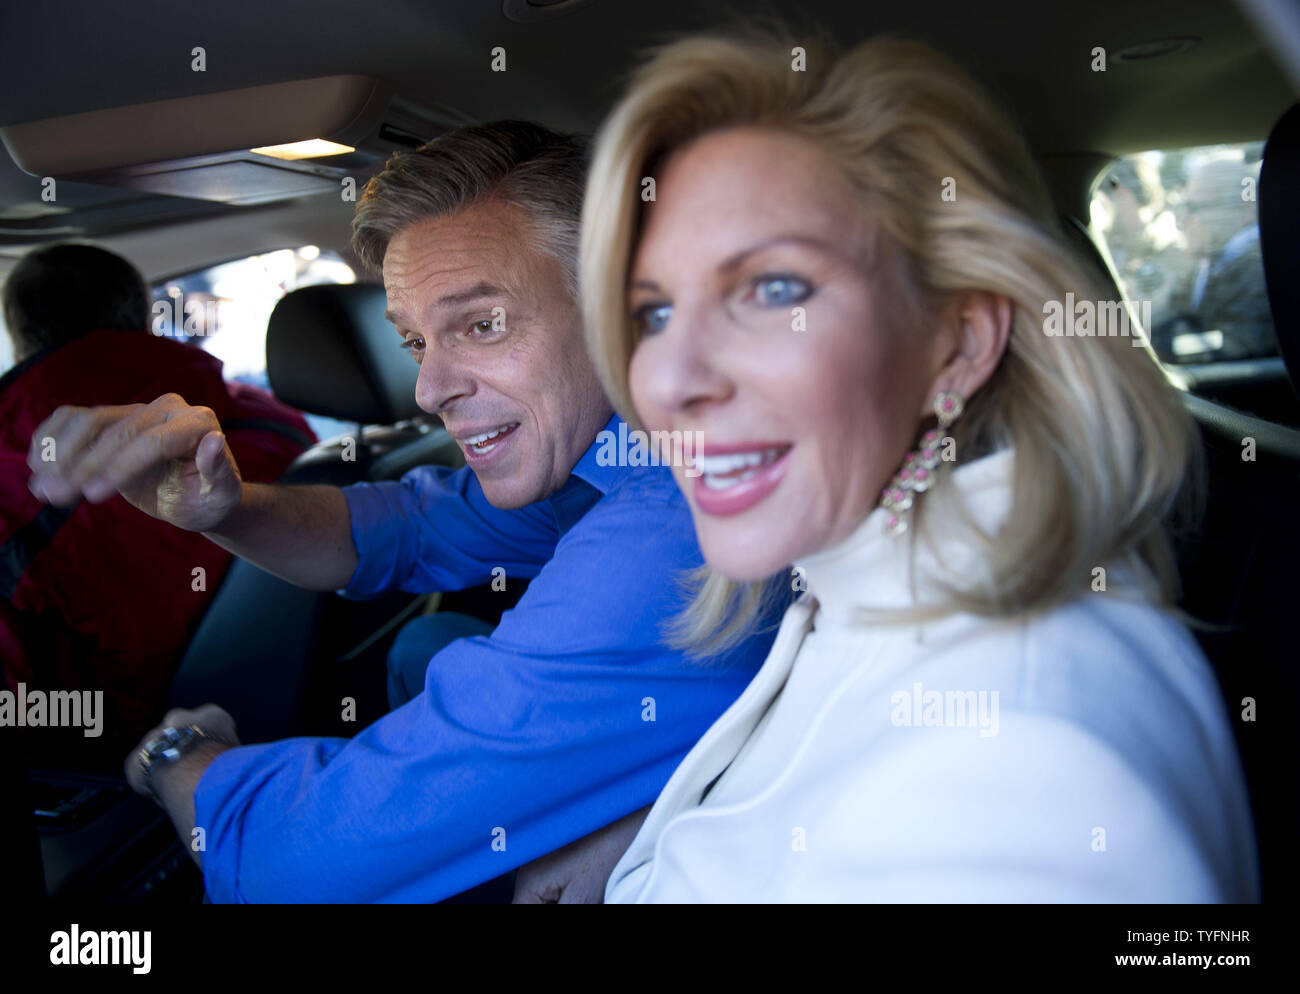 Republican presidential candidate Jon Huntsman and his wife Mary Kaye leave after greeting voters on primary election day at the Webster School polling location in Manchester, New Hampshire on January 10, 2012. UPI/Kevin Dietsch Stock Photo